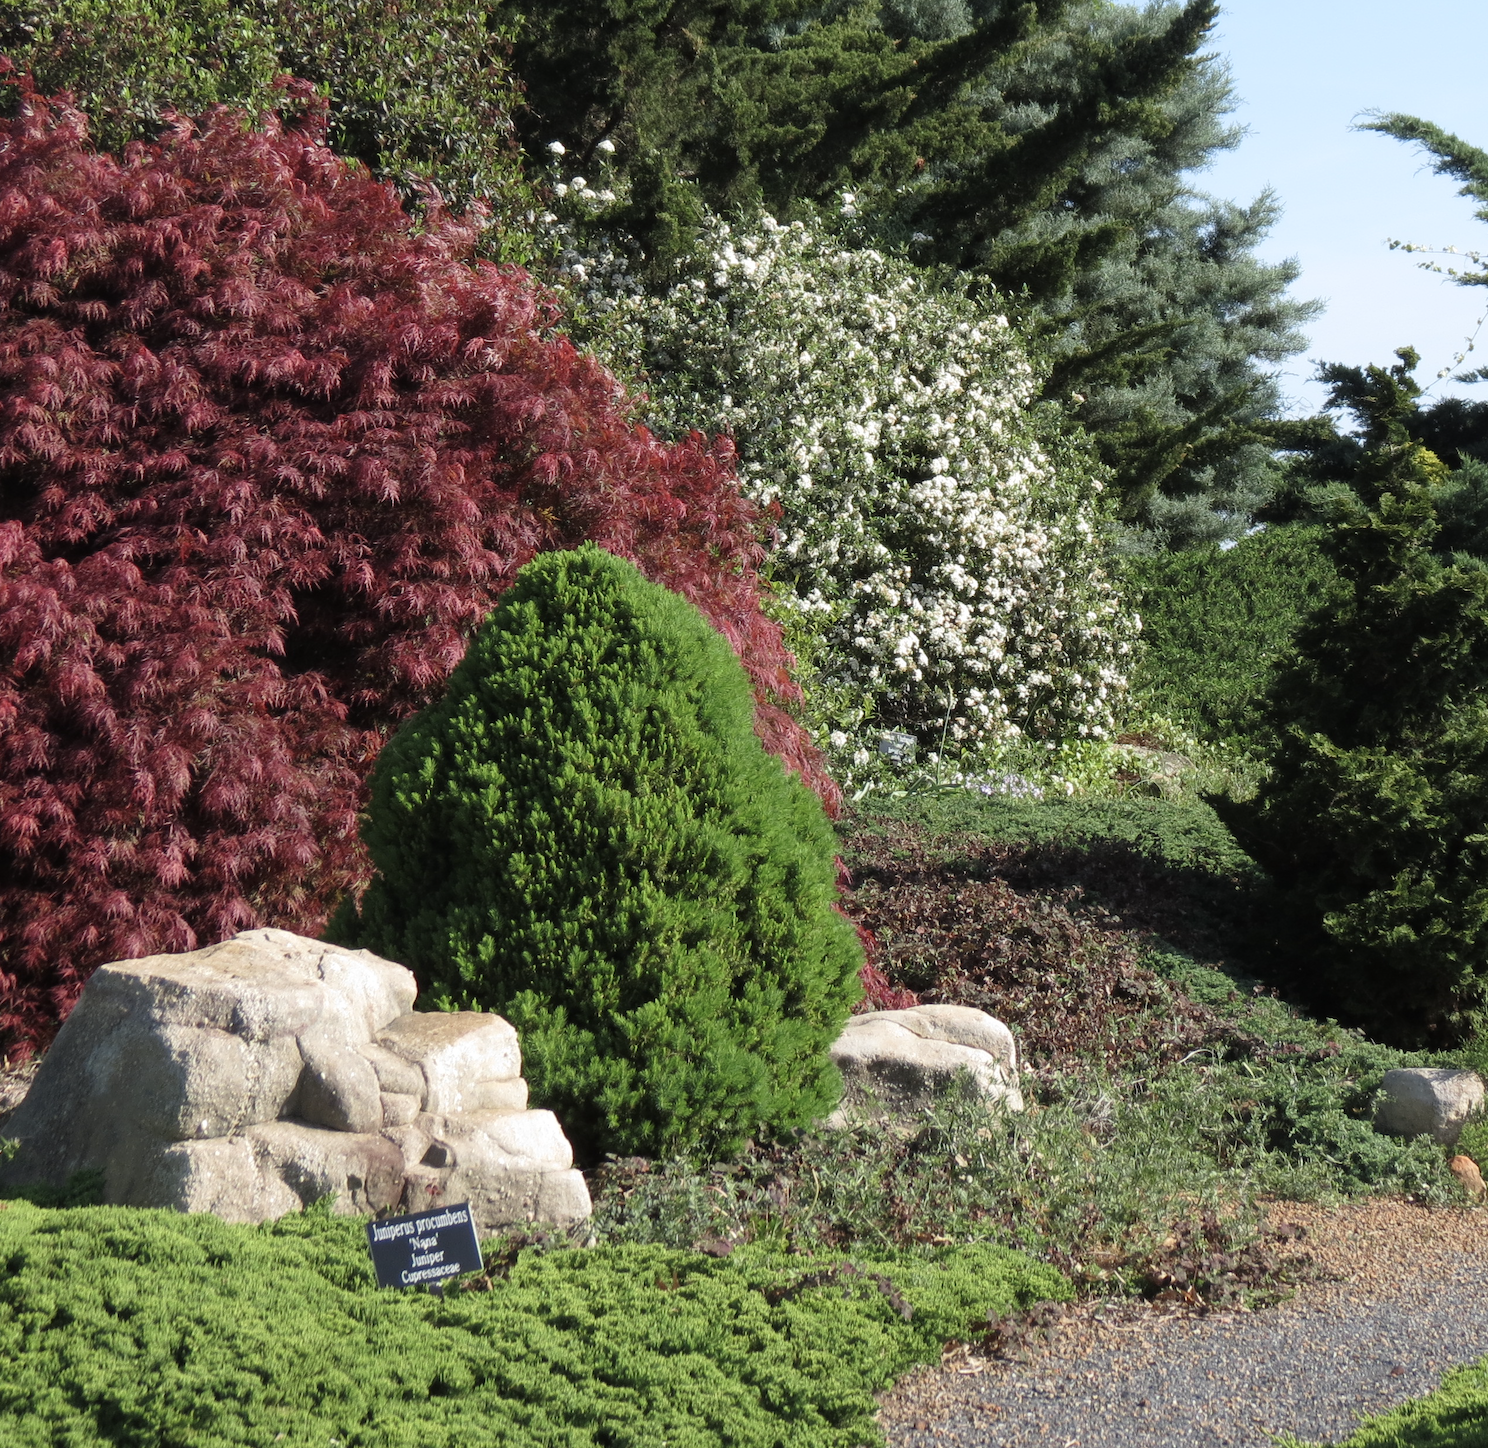 Evergreen and deciduous plants of different colors and forms can be used together to create a visually appealing landscape.